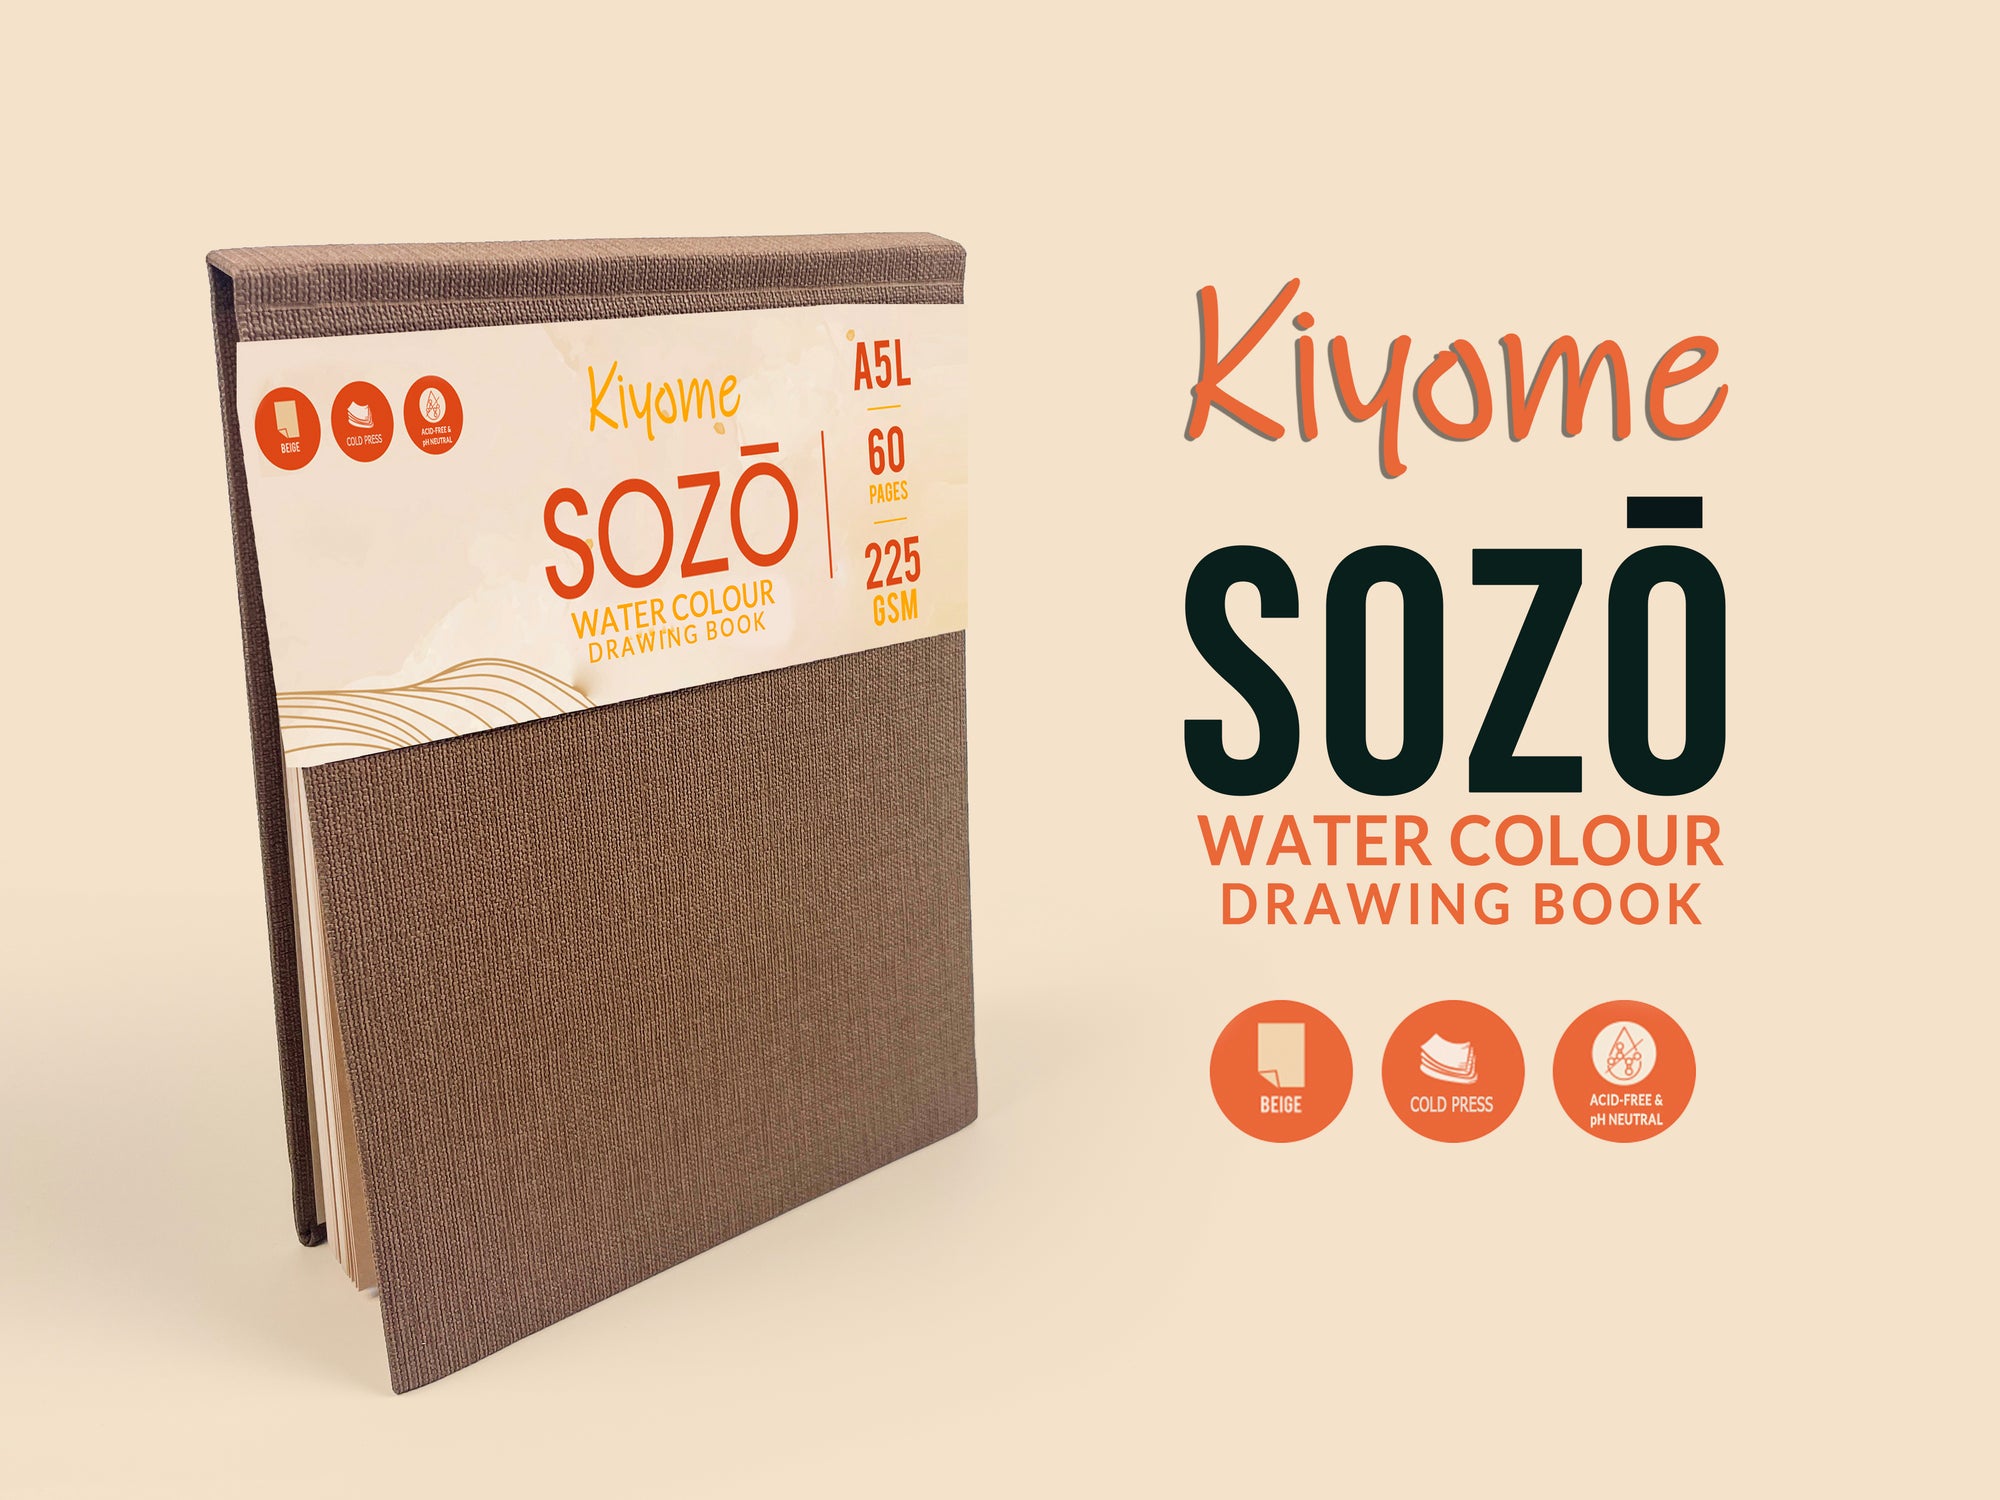 Kiyome SOZO Beige Toned Sketchbook | Canvas Textured Cover | 225 GSM | A5 | 60 Pages | 60 Sheets